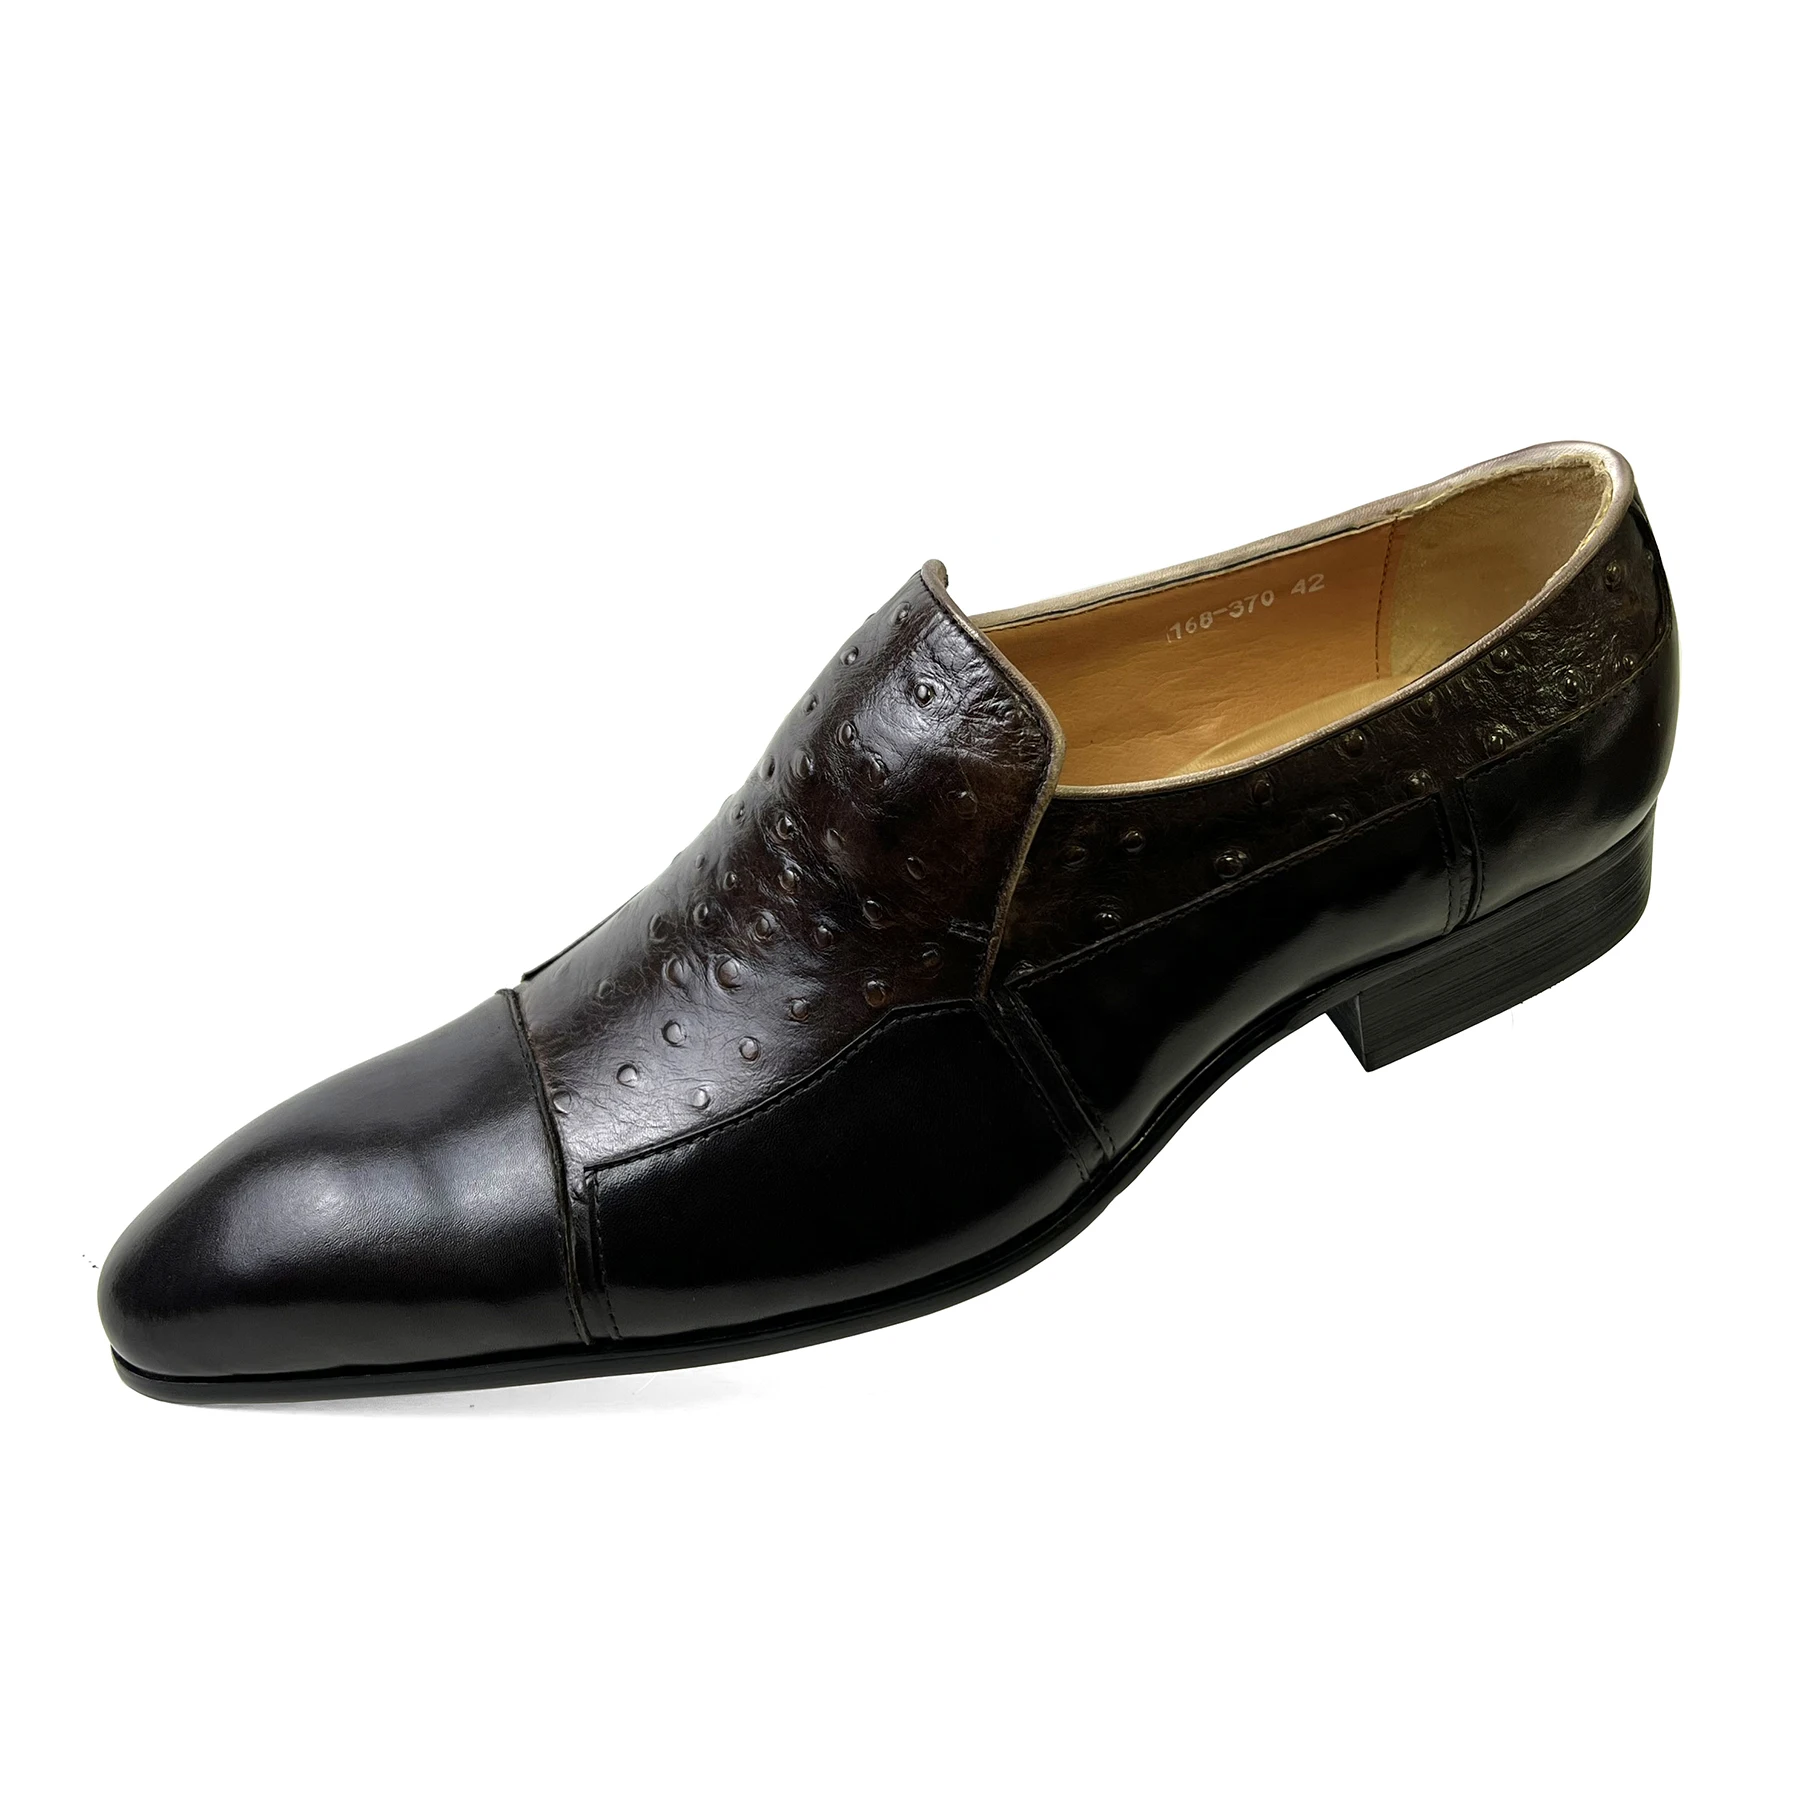 Monk Strap Slip on Genuine Leather Business Handmade Dress Brogue Shoes for Men with Buckle